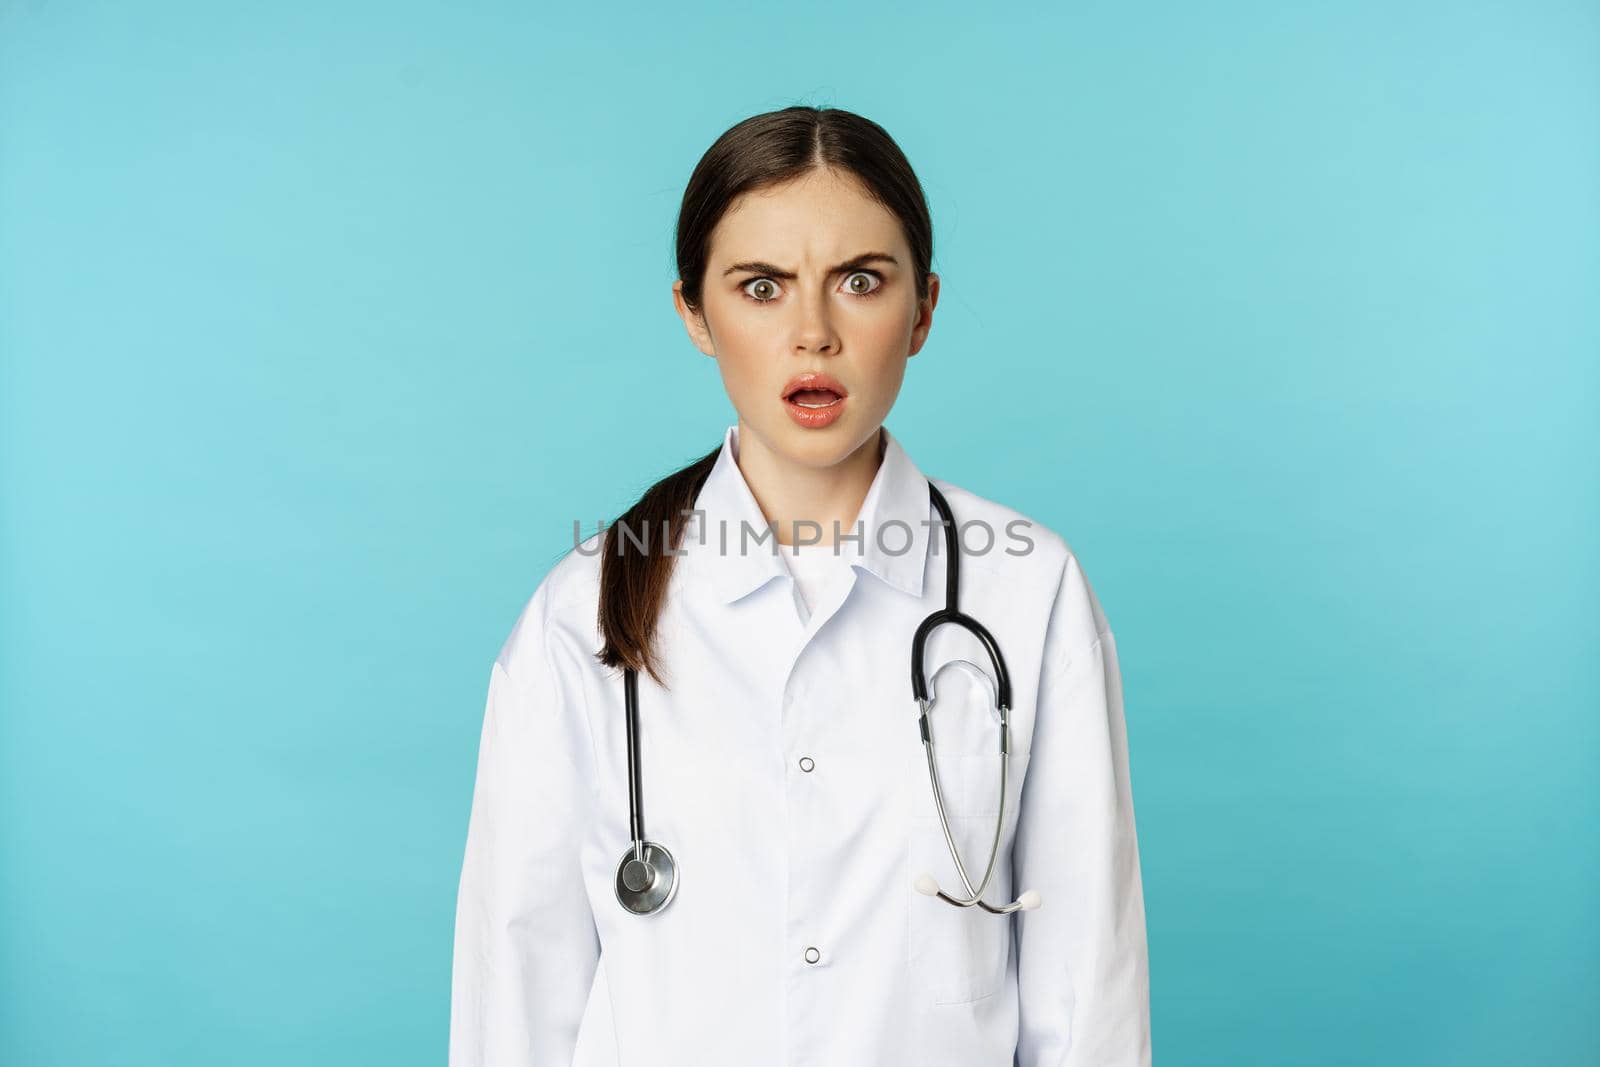 Portrait of shocked woman doctor, female hospital intern in white coat, looking concerned and confused at camera, disbelief face, standing over torquoise background.